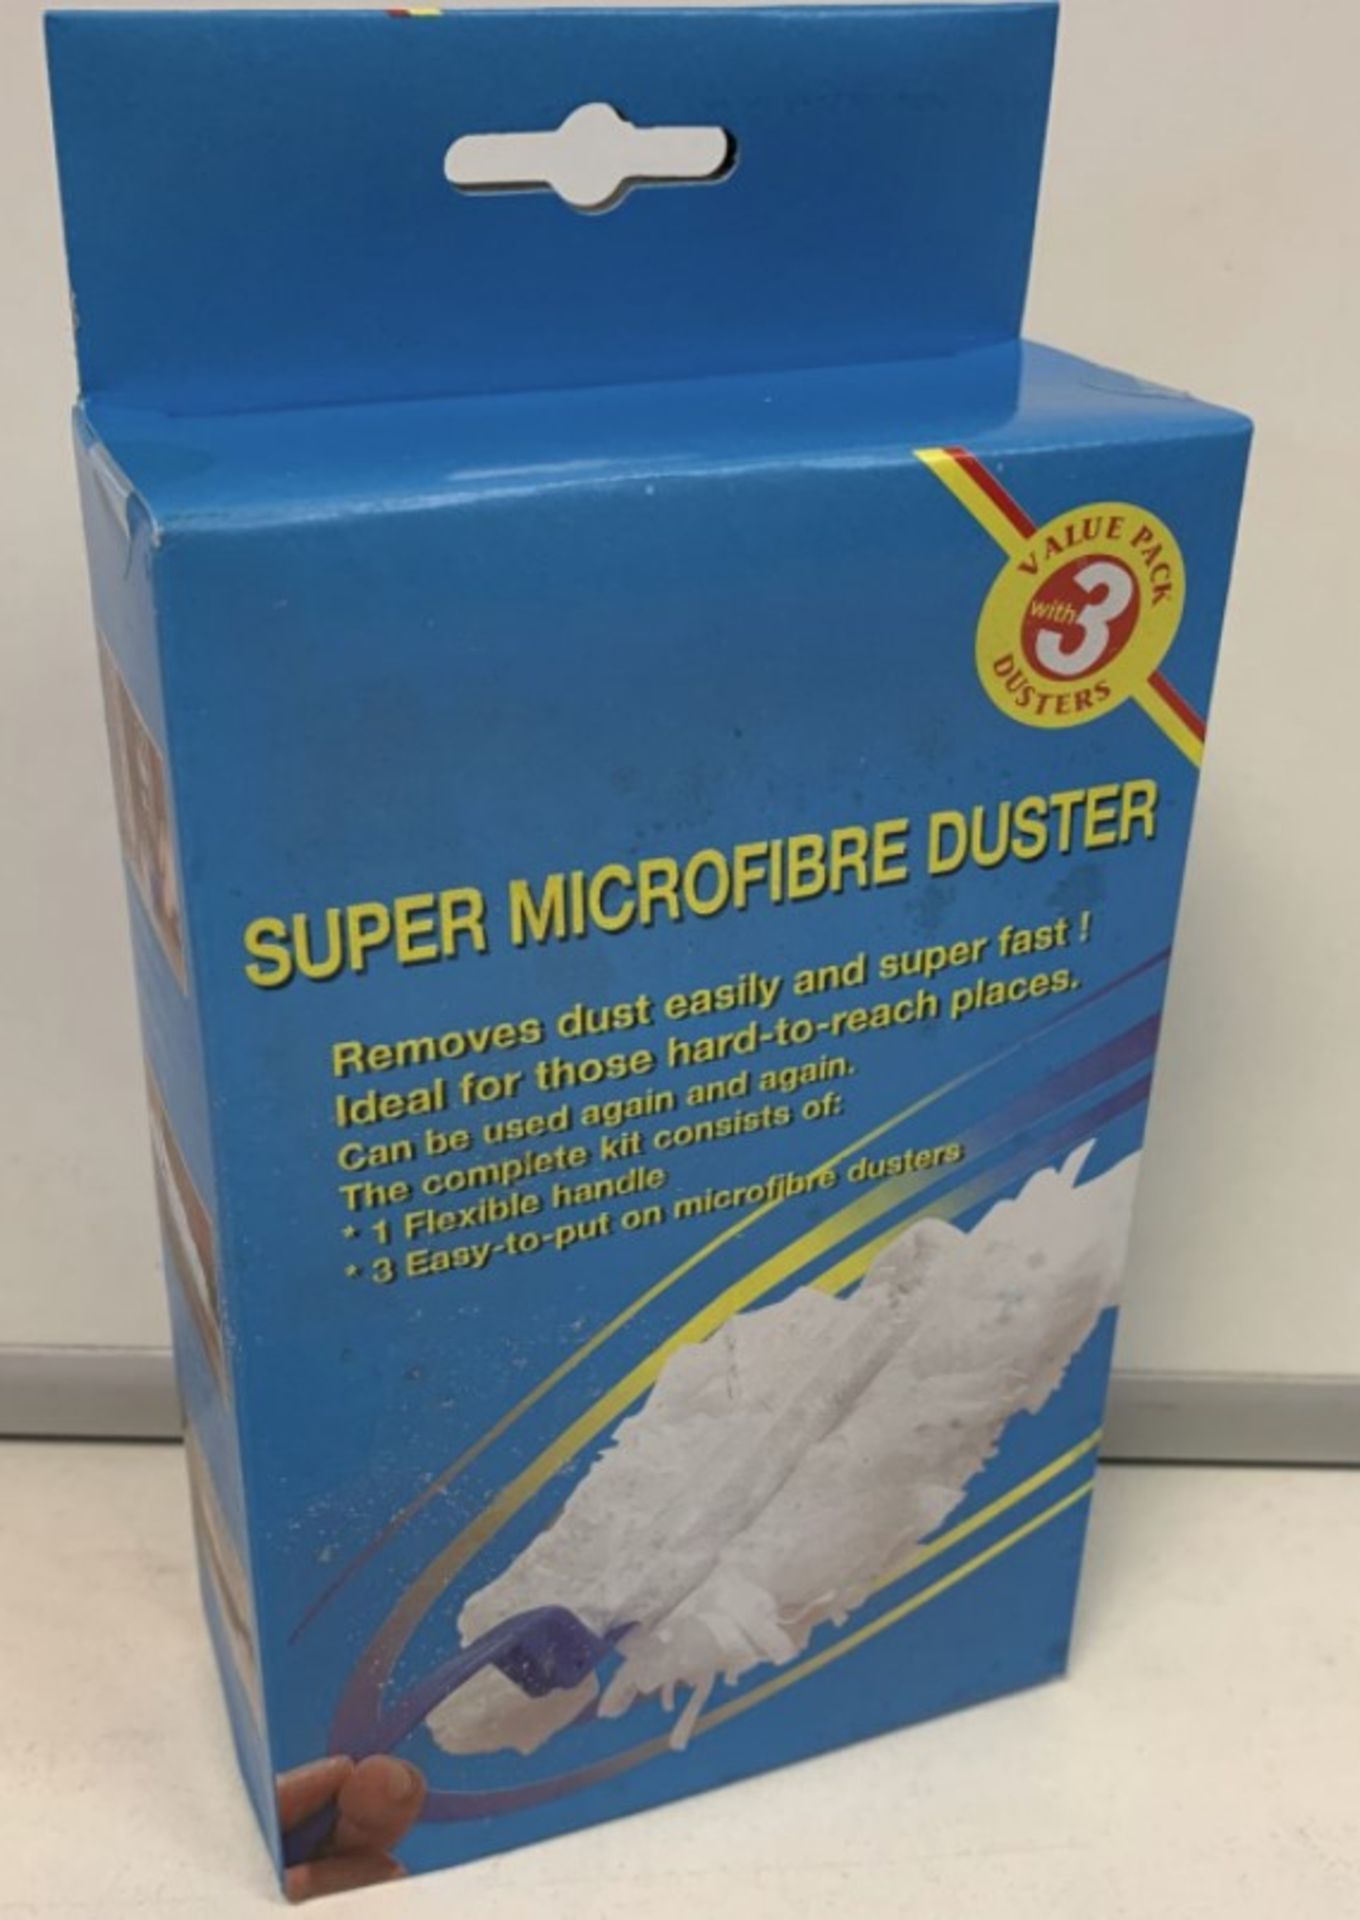 12 x Super Microfibre Duster with 3 Dusters RRP 4.